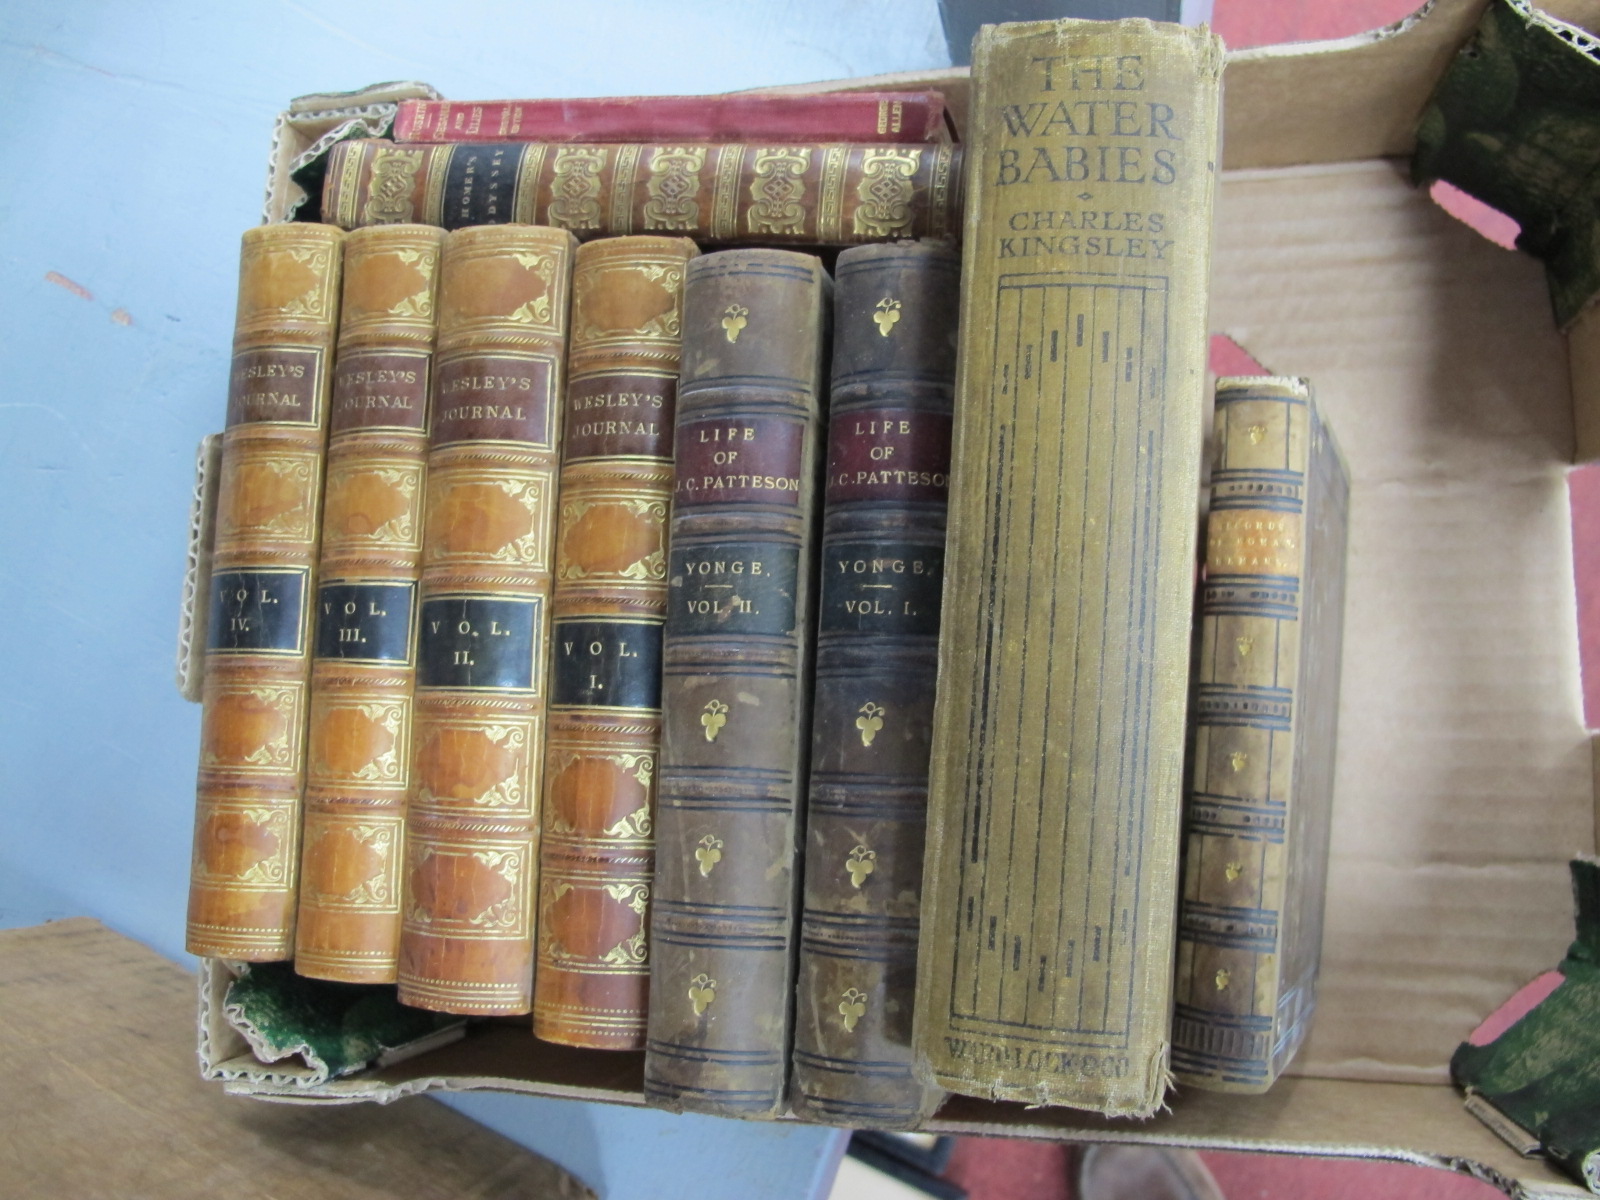 Wesley's Journal, four volumes, The Journal of The Rev John Wesley, A.M from 14th 1735 to October